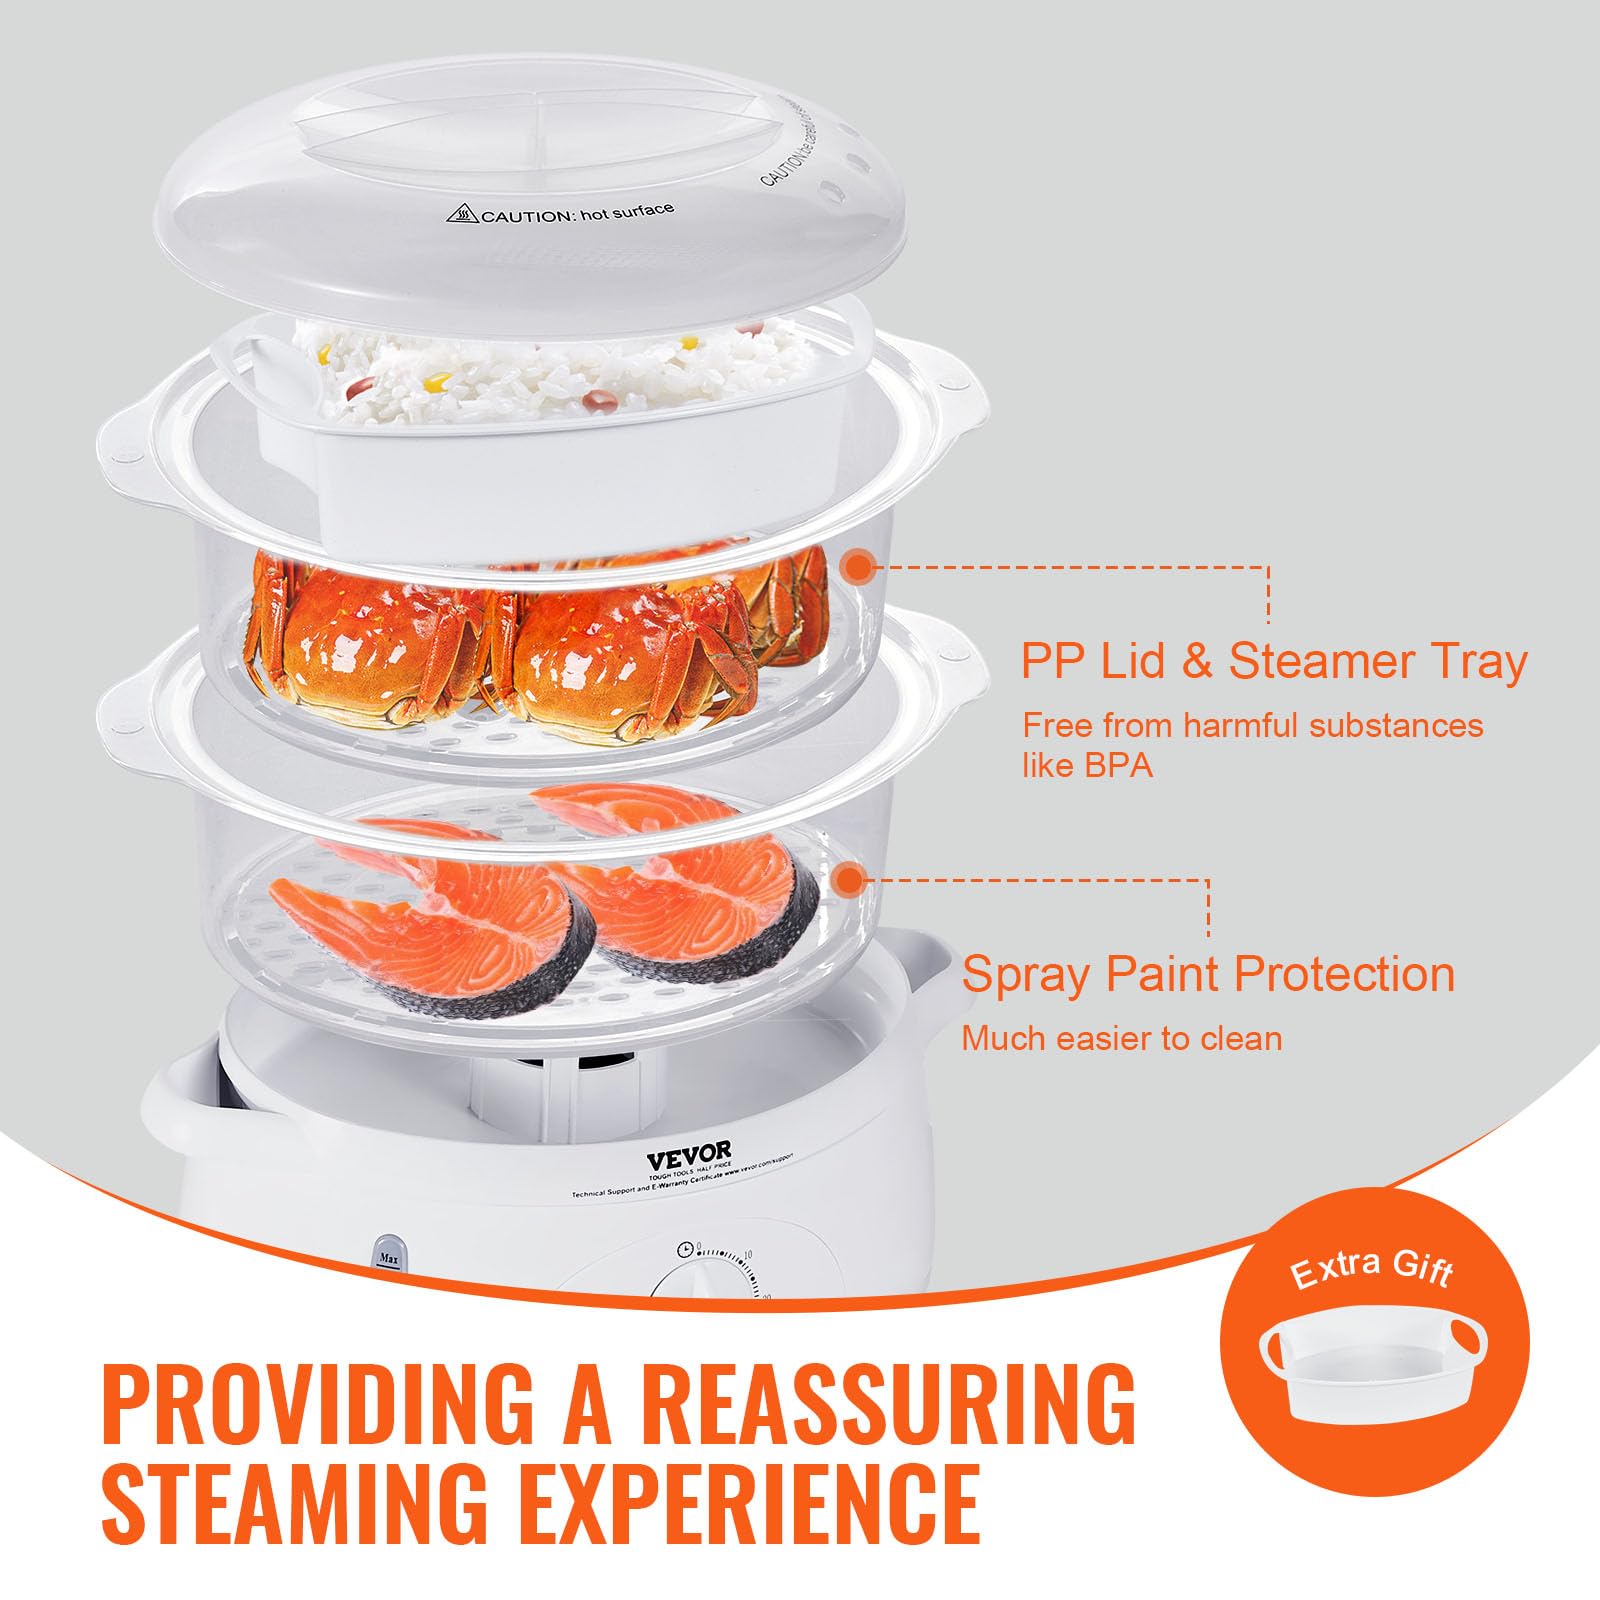 VEVOR Electric Food Streamer, 7.4Qt Electric Vegetable Steamer with 2-Tier Stackable Trays, Food-Grade Food Steamer for Cooking with 60 Min Timer, Auto Shut-Off & Boil Dry Protection (800W)…